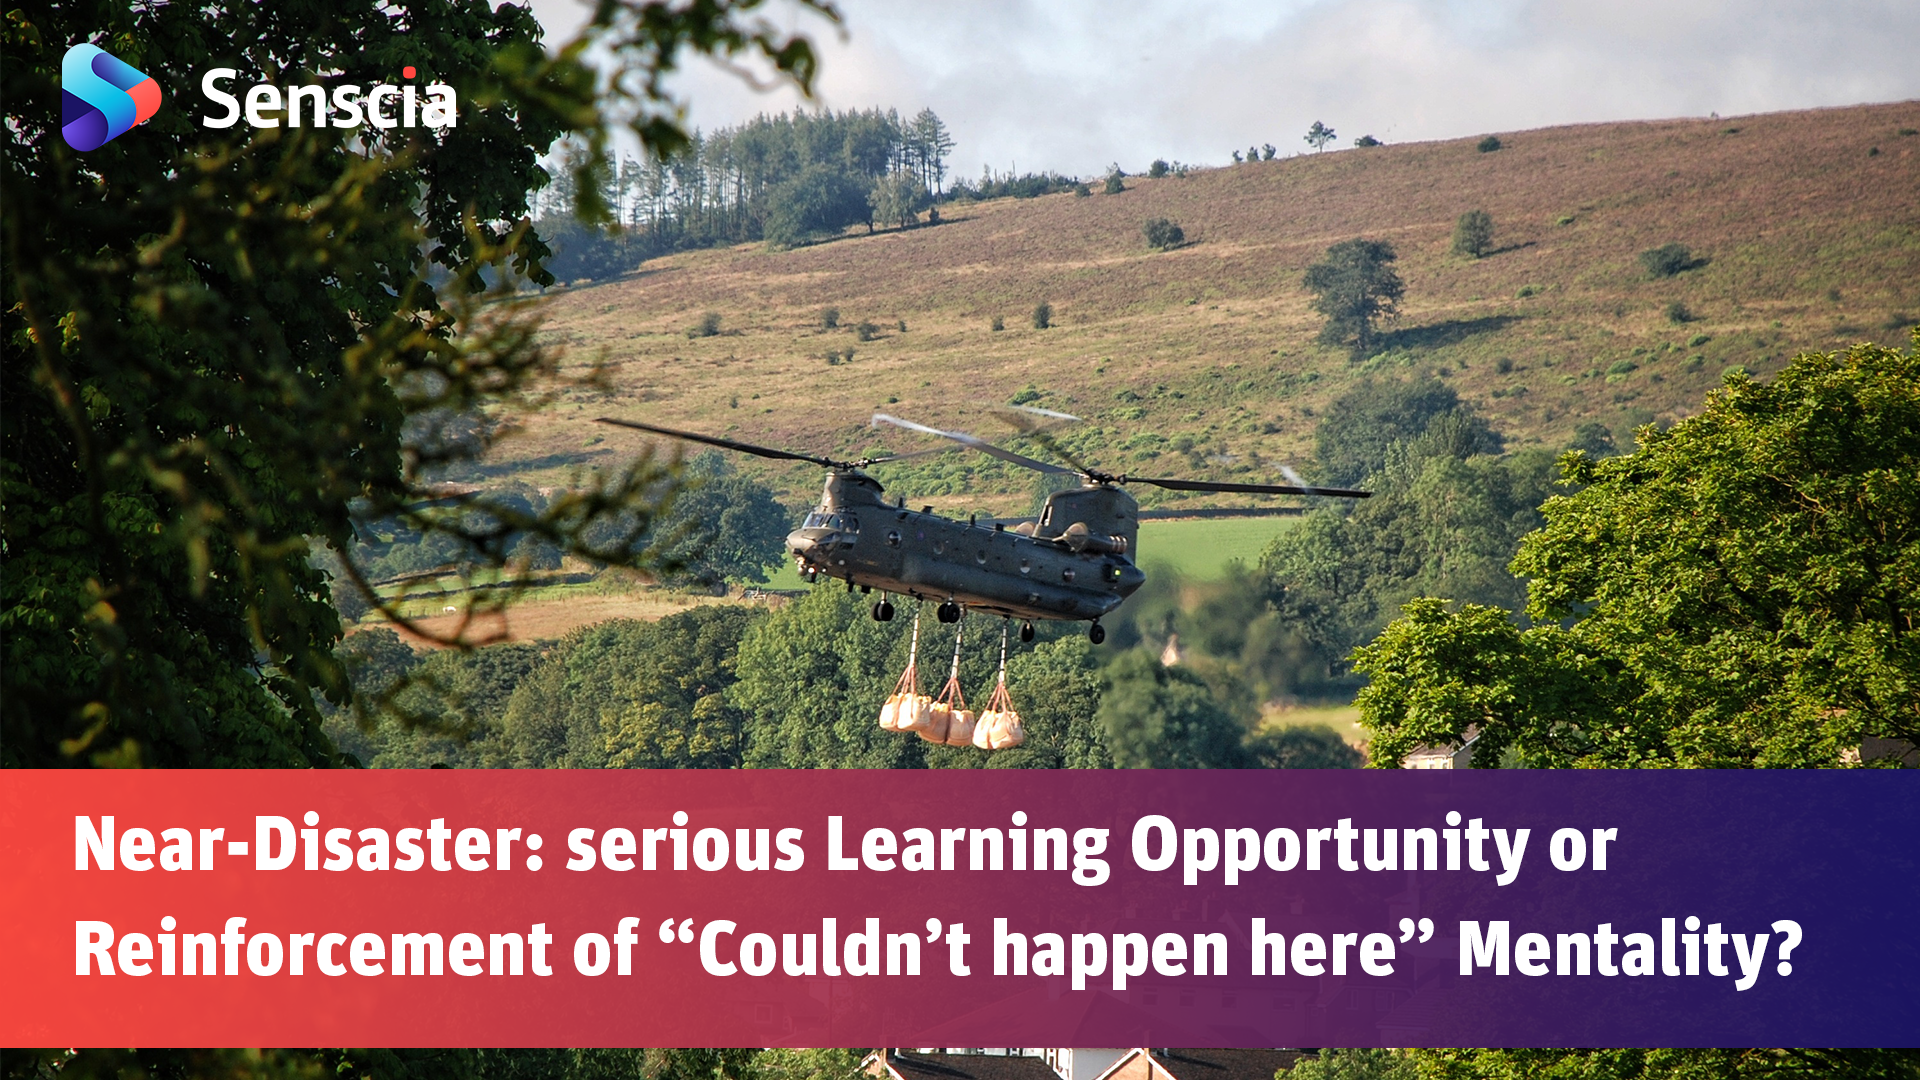 A Chinook helicopter carrying sand bulk bags over the village of Whaley Bridge. The text includes the title of the article " Near-Disaster: serious Learning Opportunity or Reinforcement of "Couldn't happen here" Mentality?"